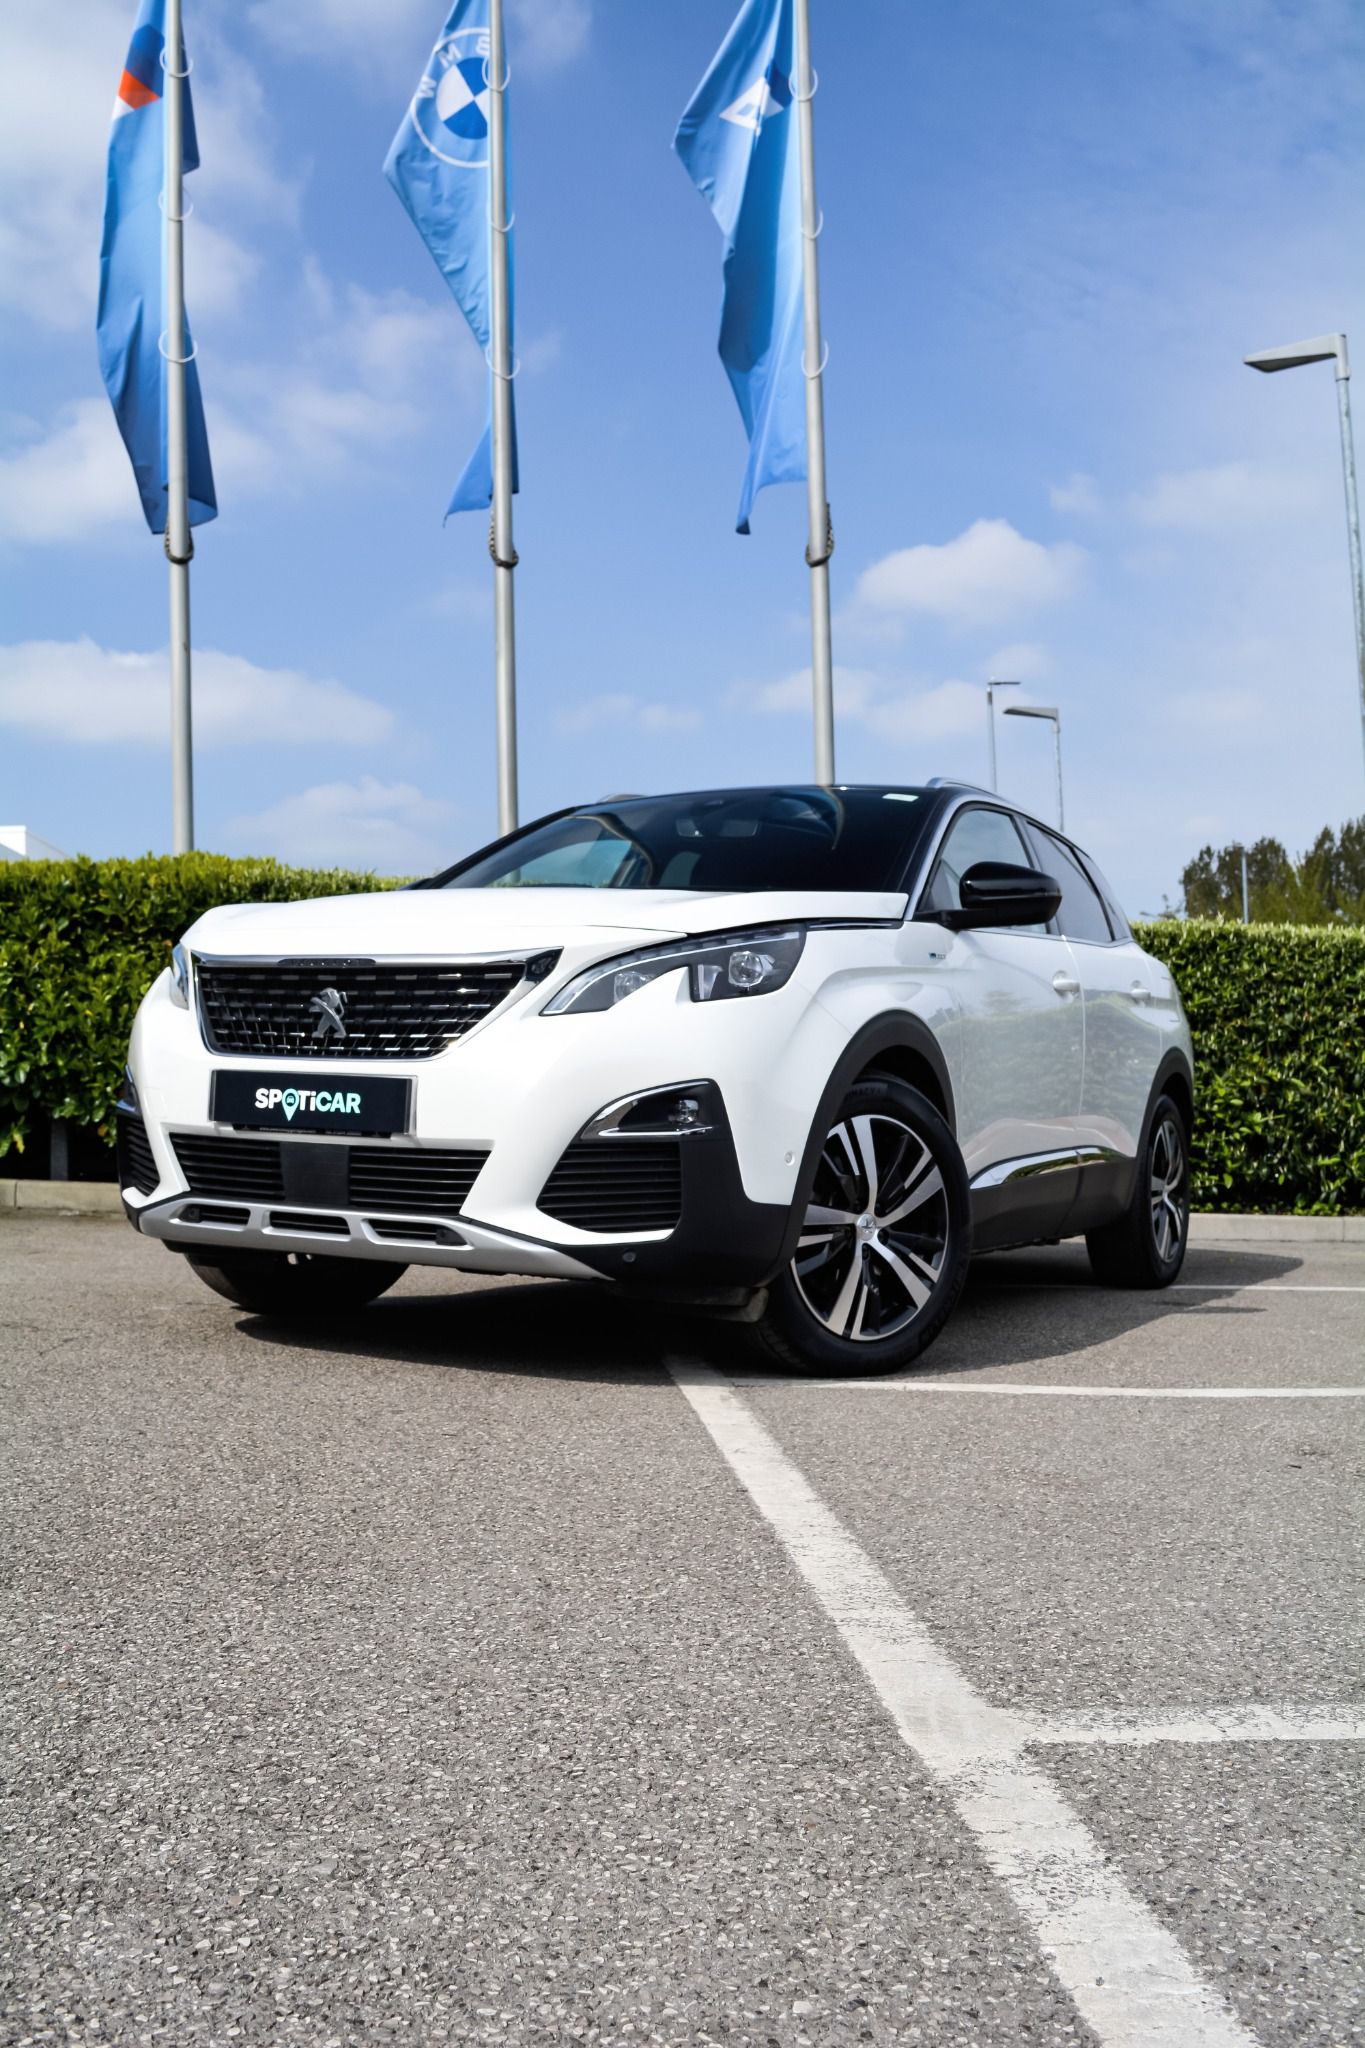 peugeot 3008 with blue sky above